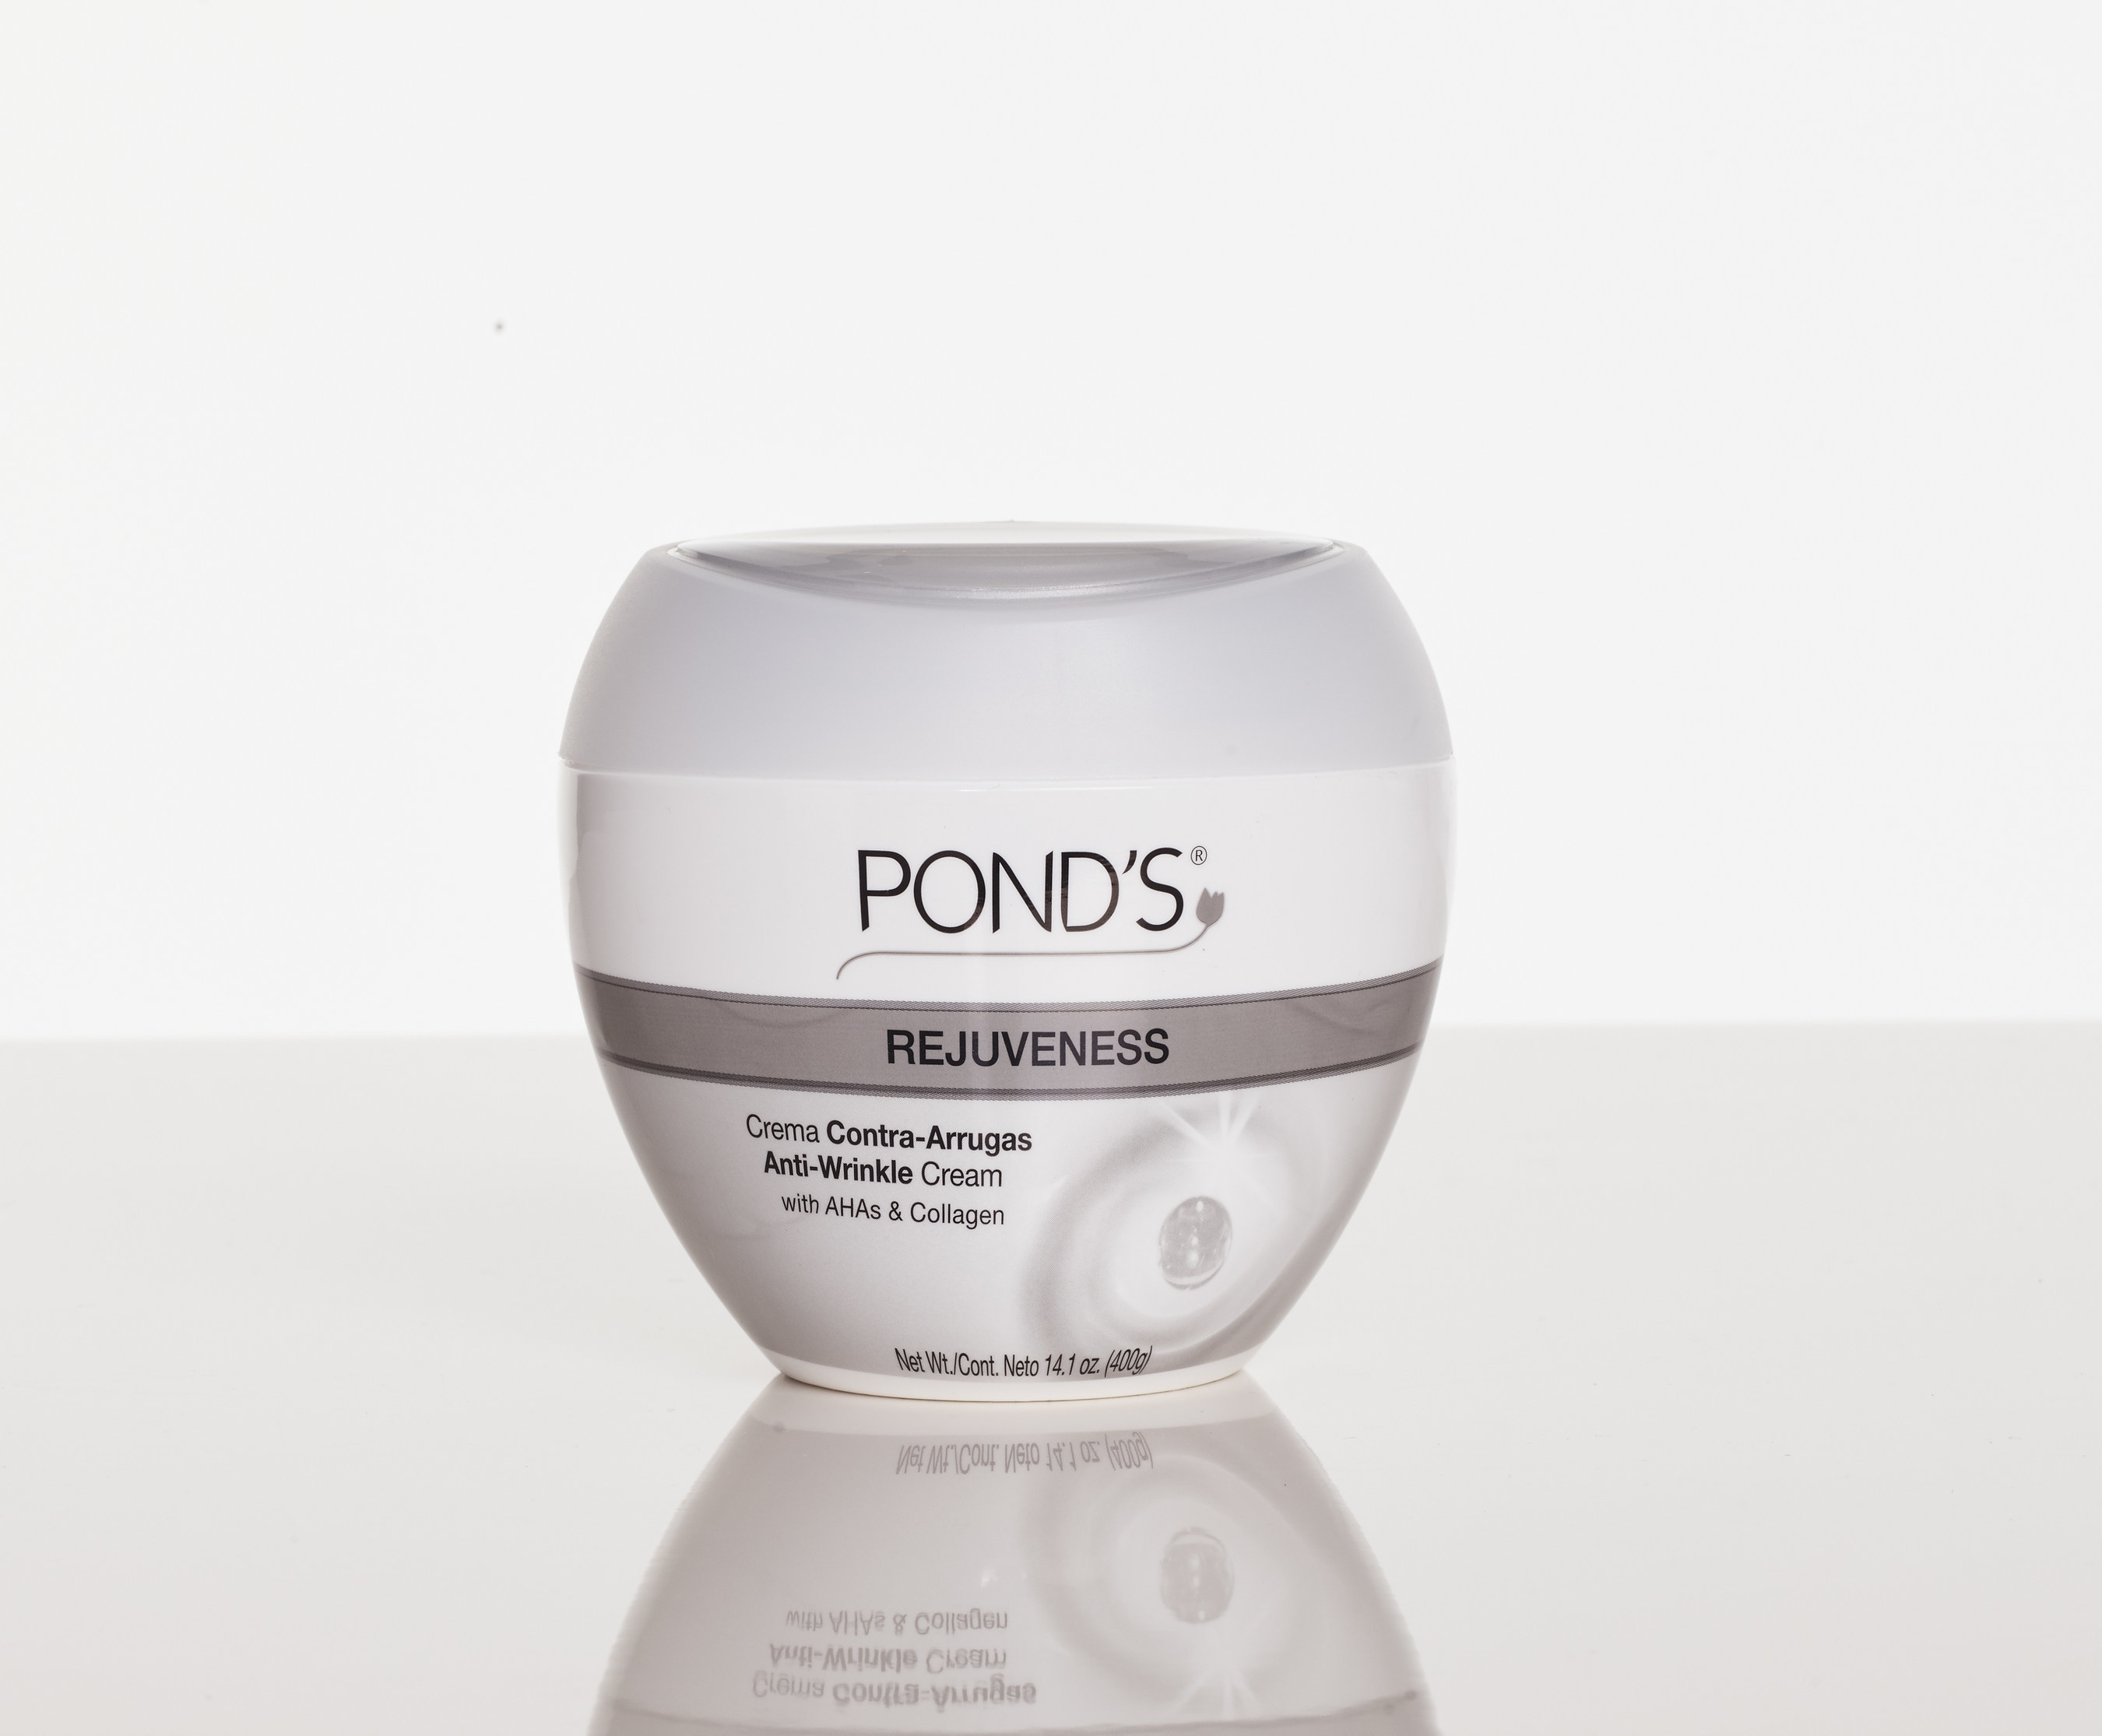 Made with collagen, alpha hydroxy acids and vitamin E, POND'S(R) Rejuveness defies the limits of what one jar can do